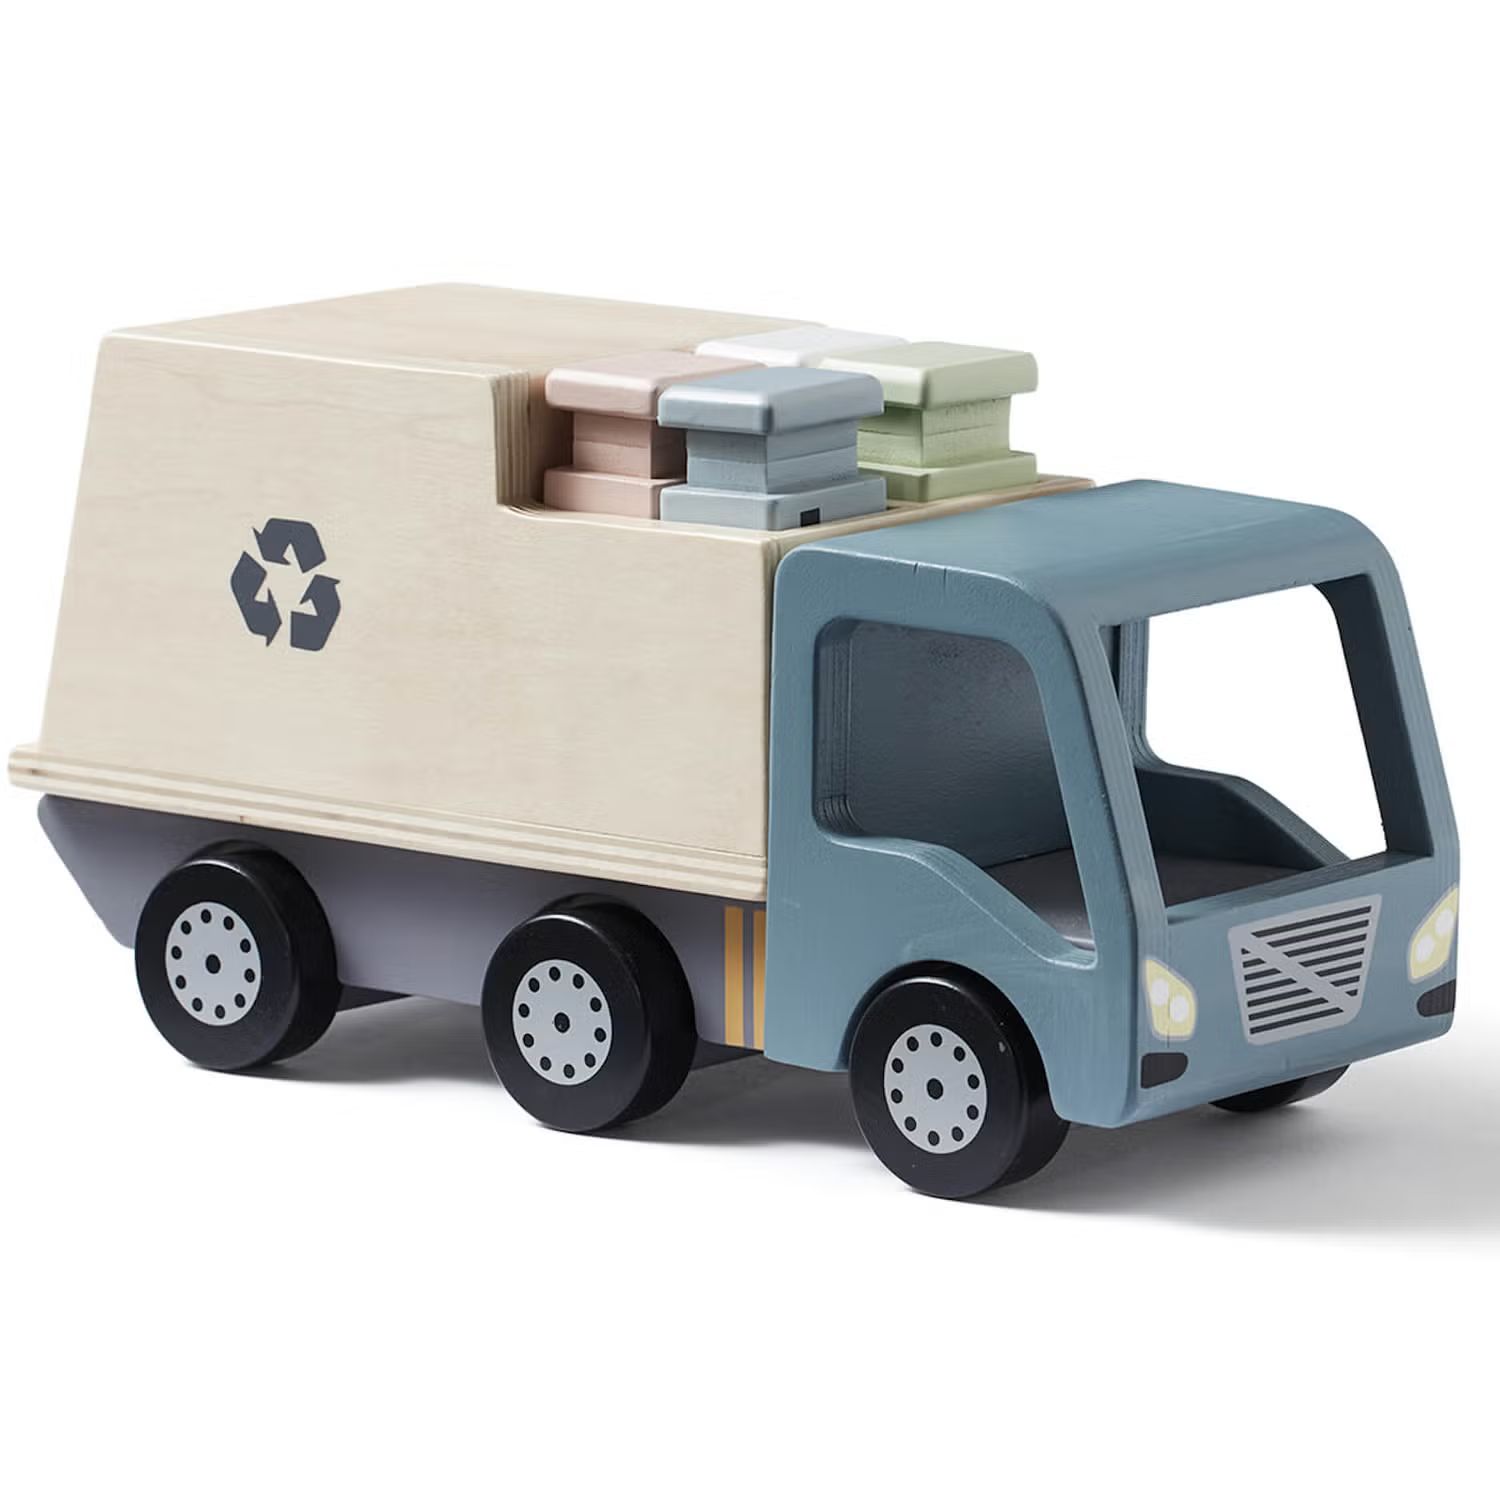 Kids Concept Garbage Truck - Grey | The Hut (Global)